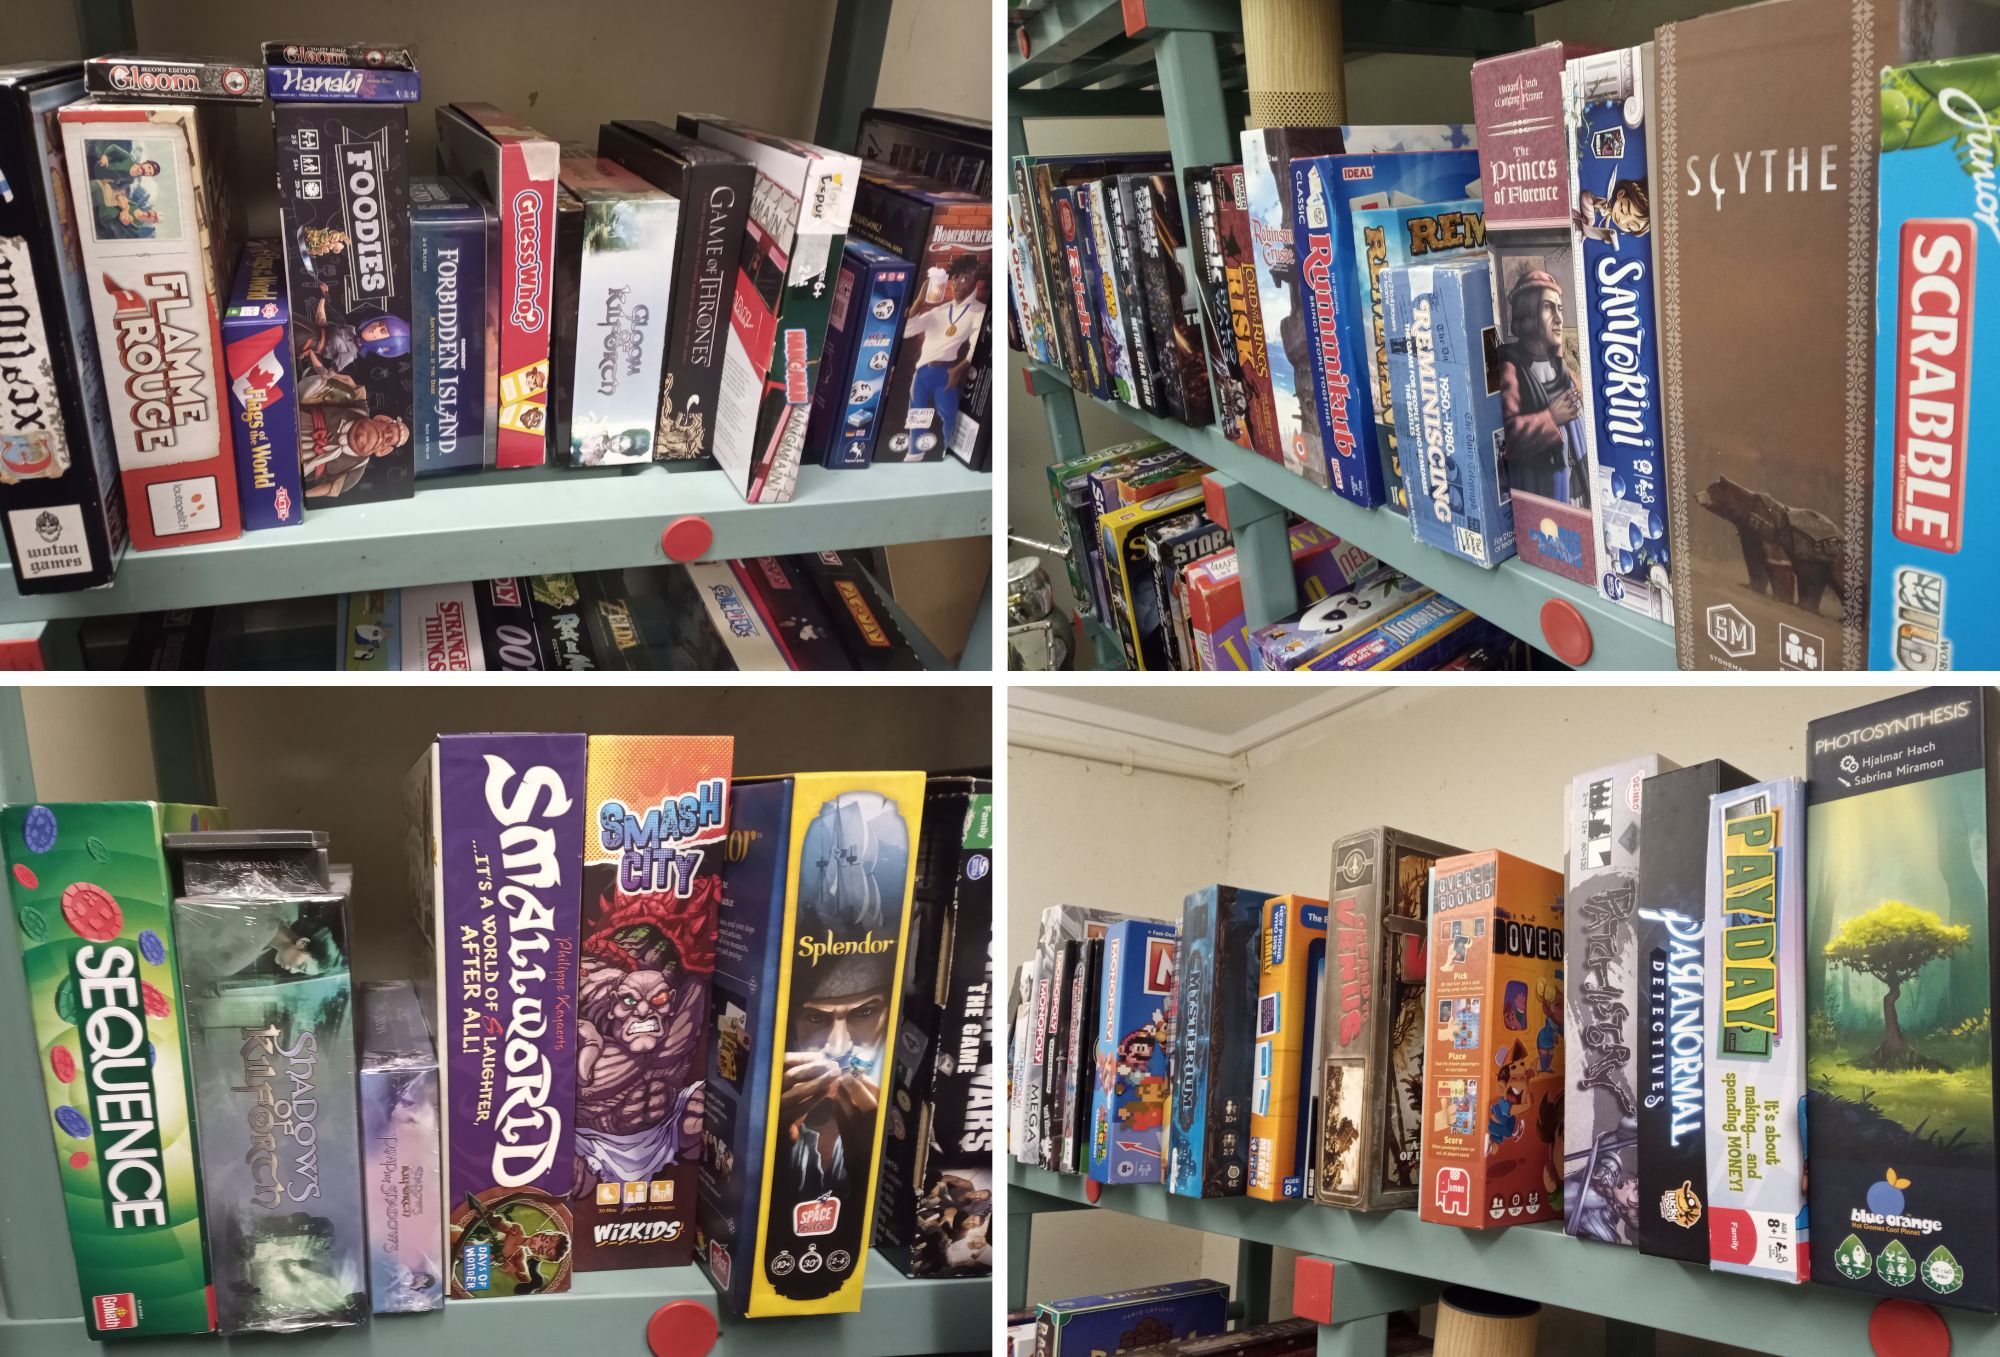 Just some of the games on affer at TableTaps in Wrexham.